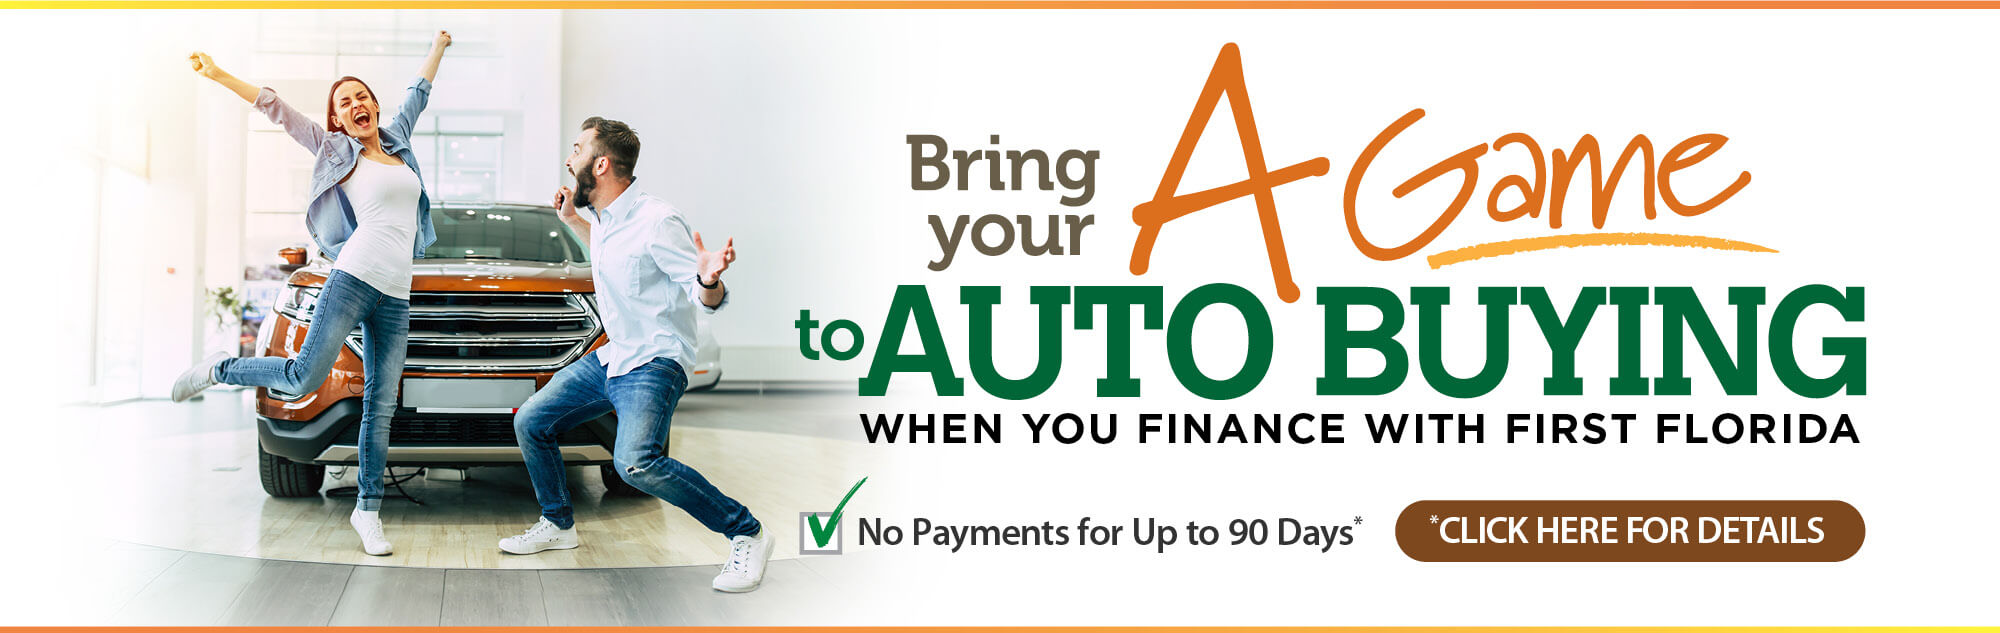 Bring your A game to Auto Buying when you finance with First Florida